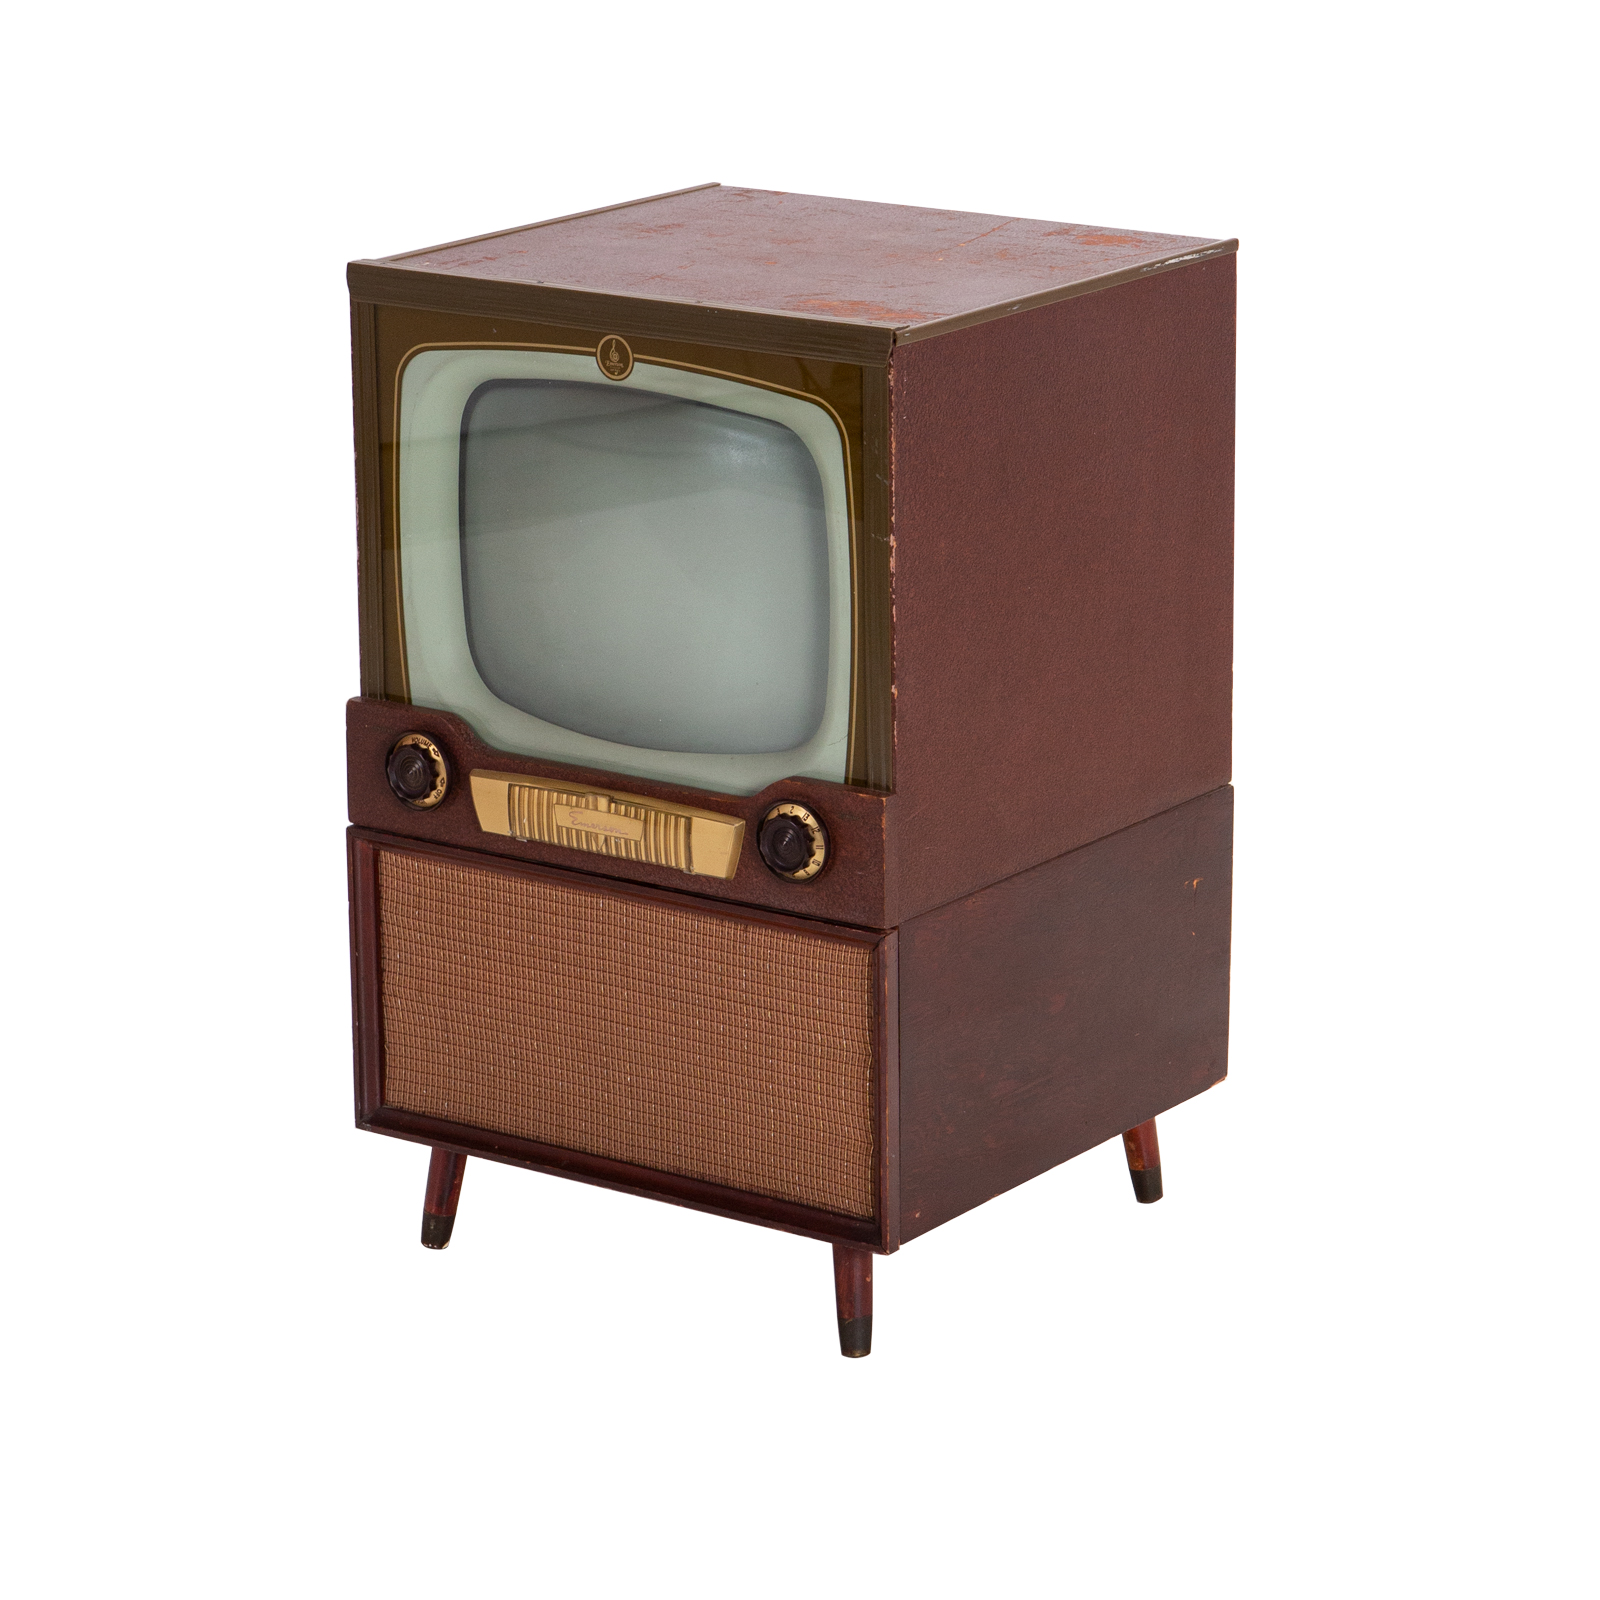 old television 1950